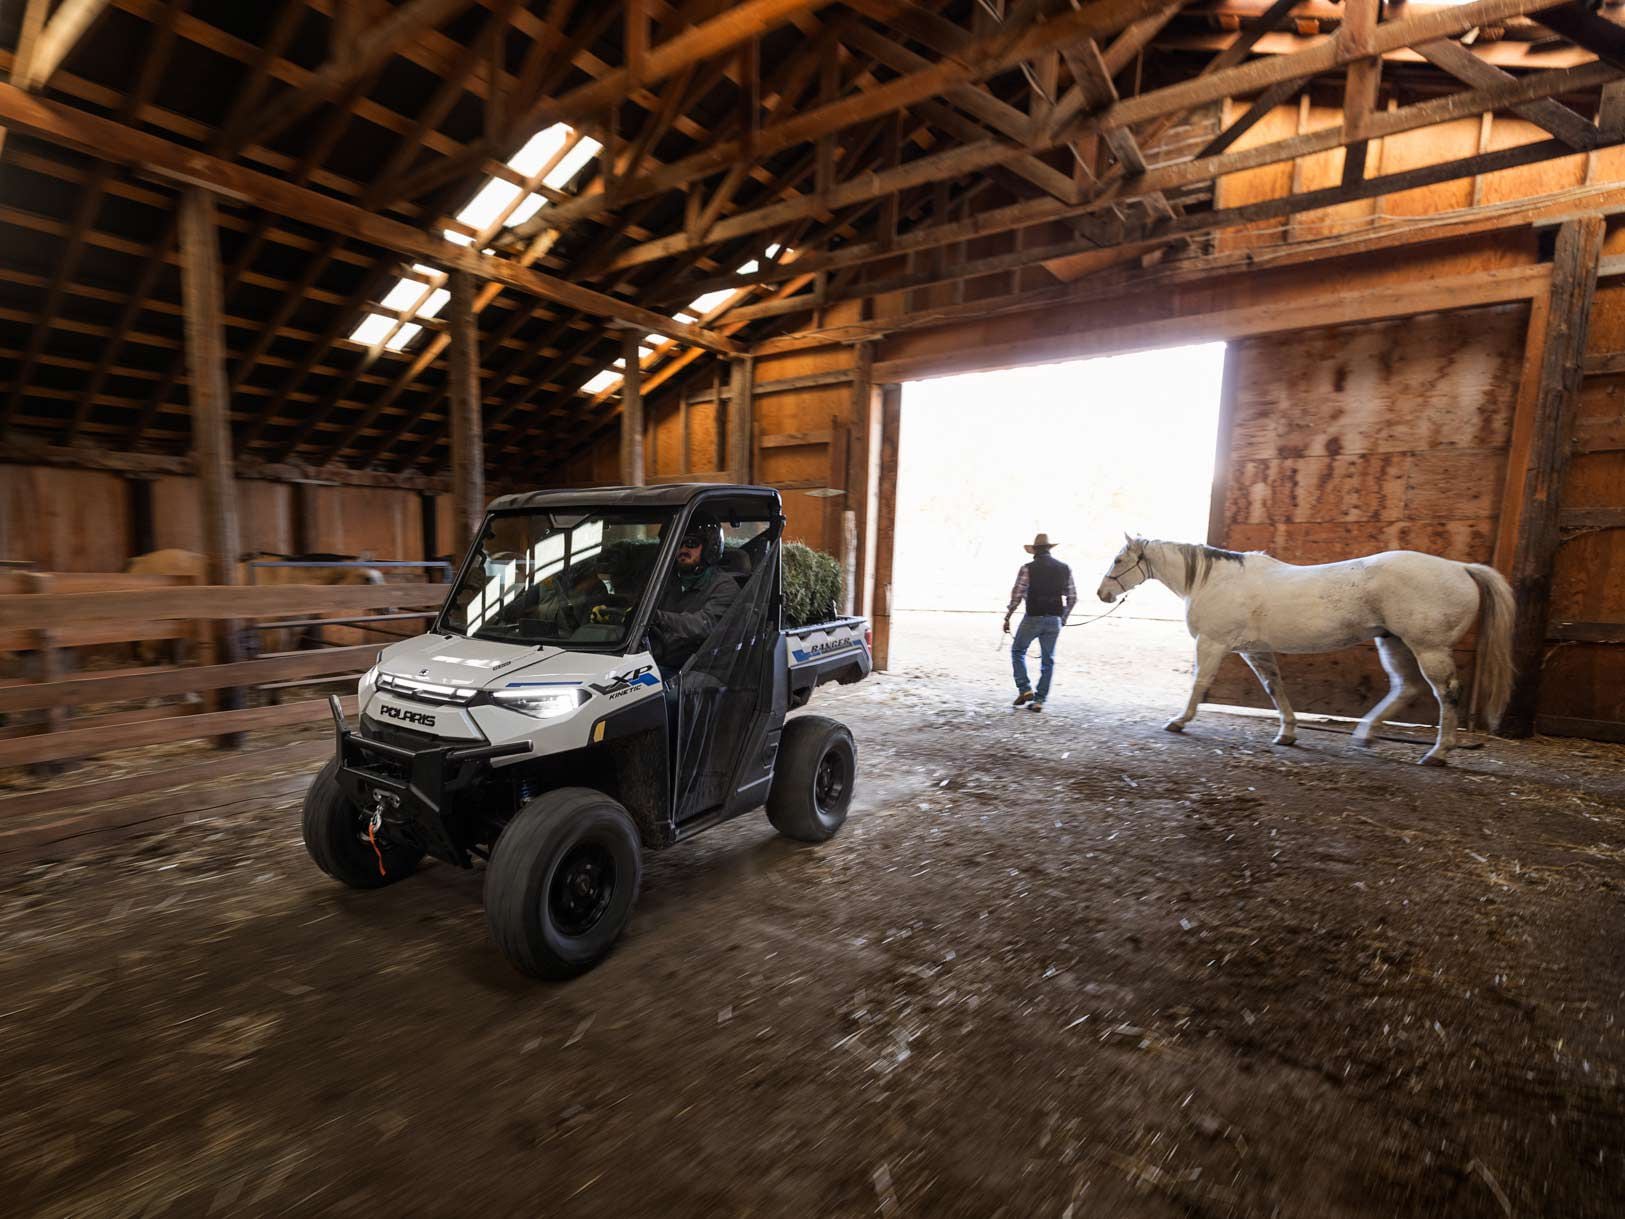 Quiet operation makes the Ranger XP Kinetic an ideal helper around livestock.